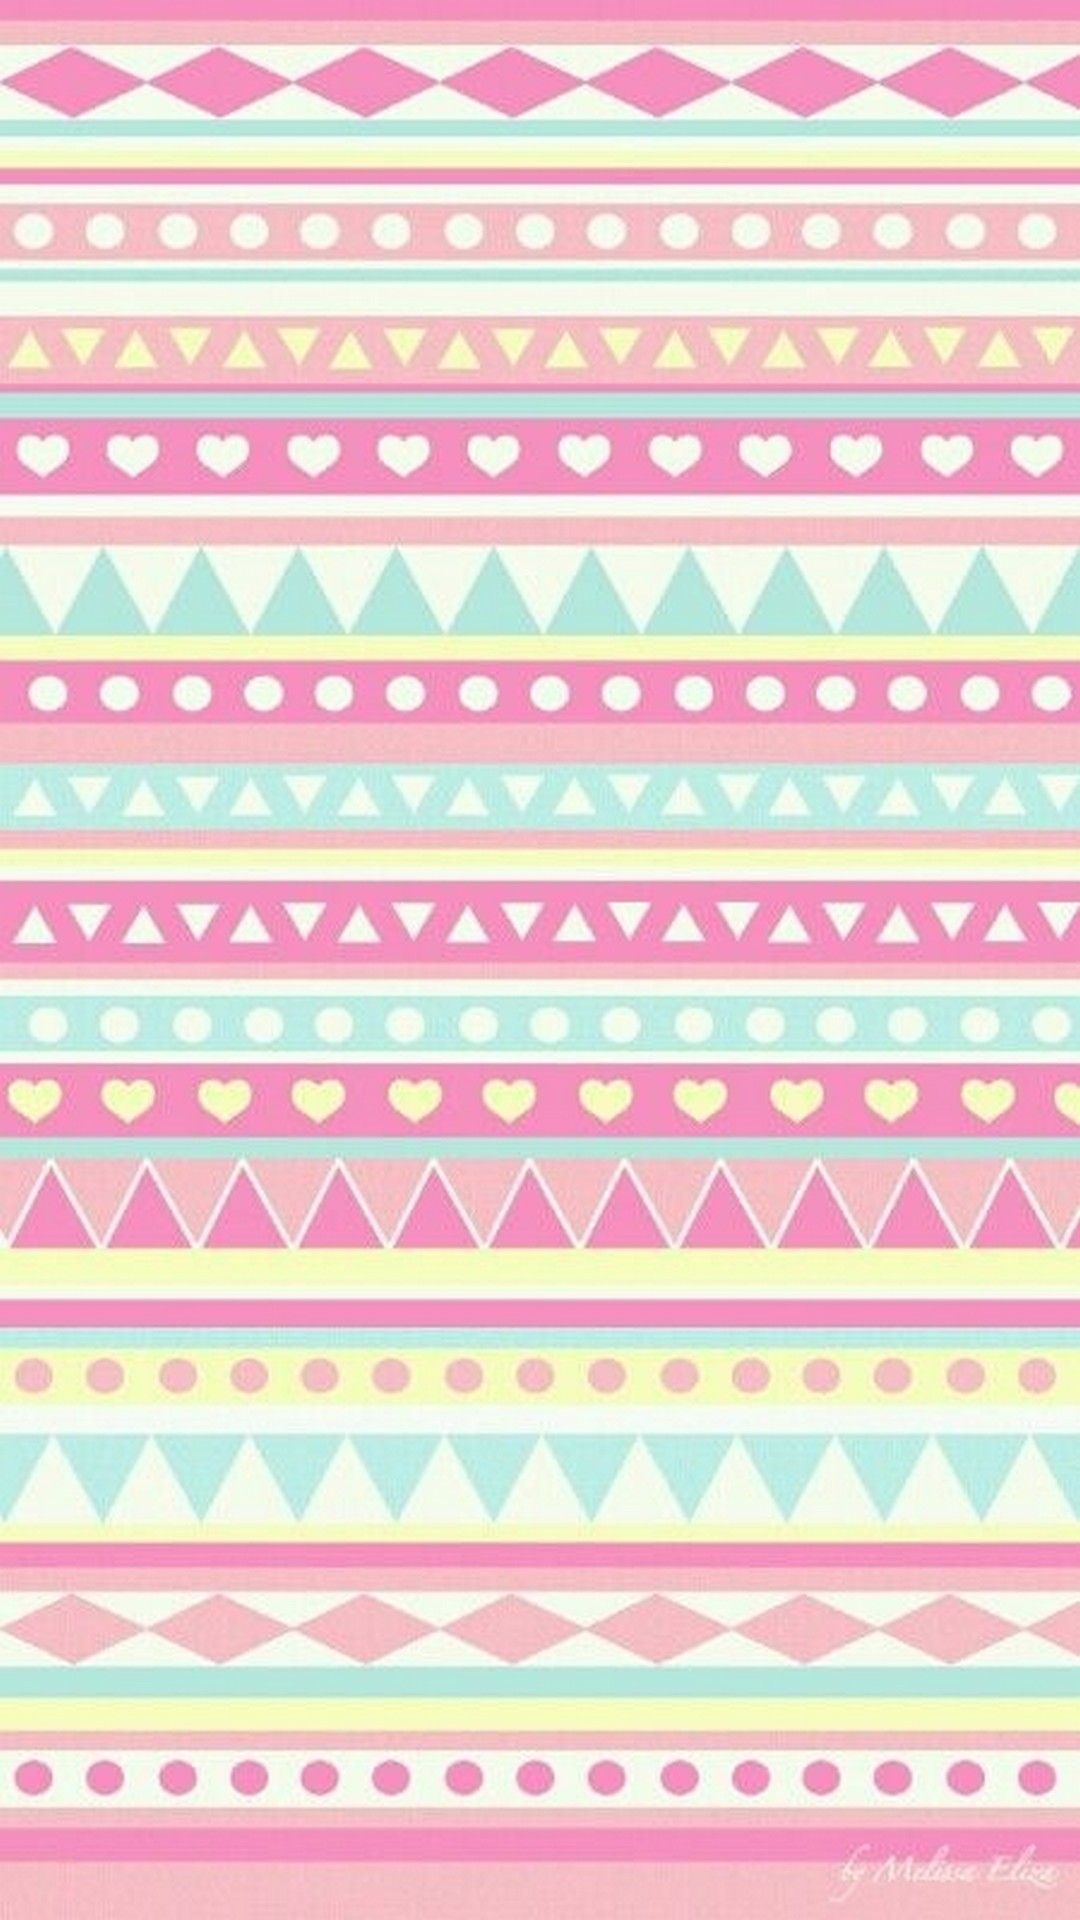 Girly Wallpaper For Android Phones Cute Wallpaper